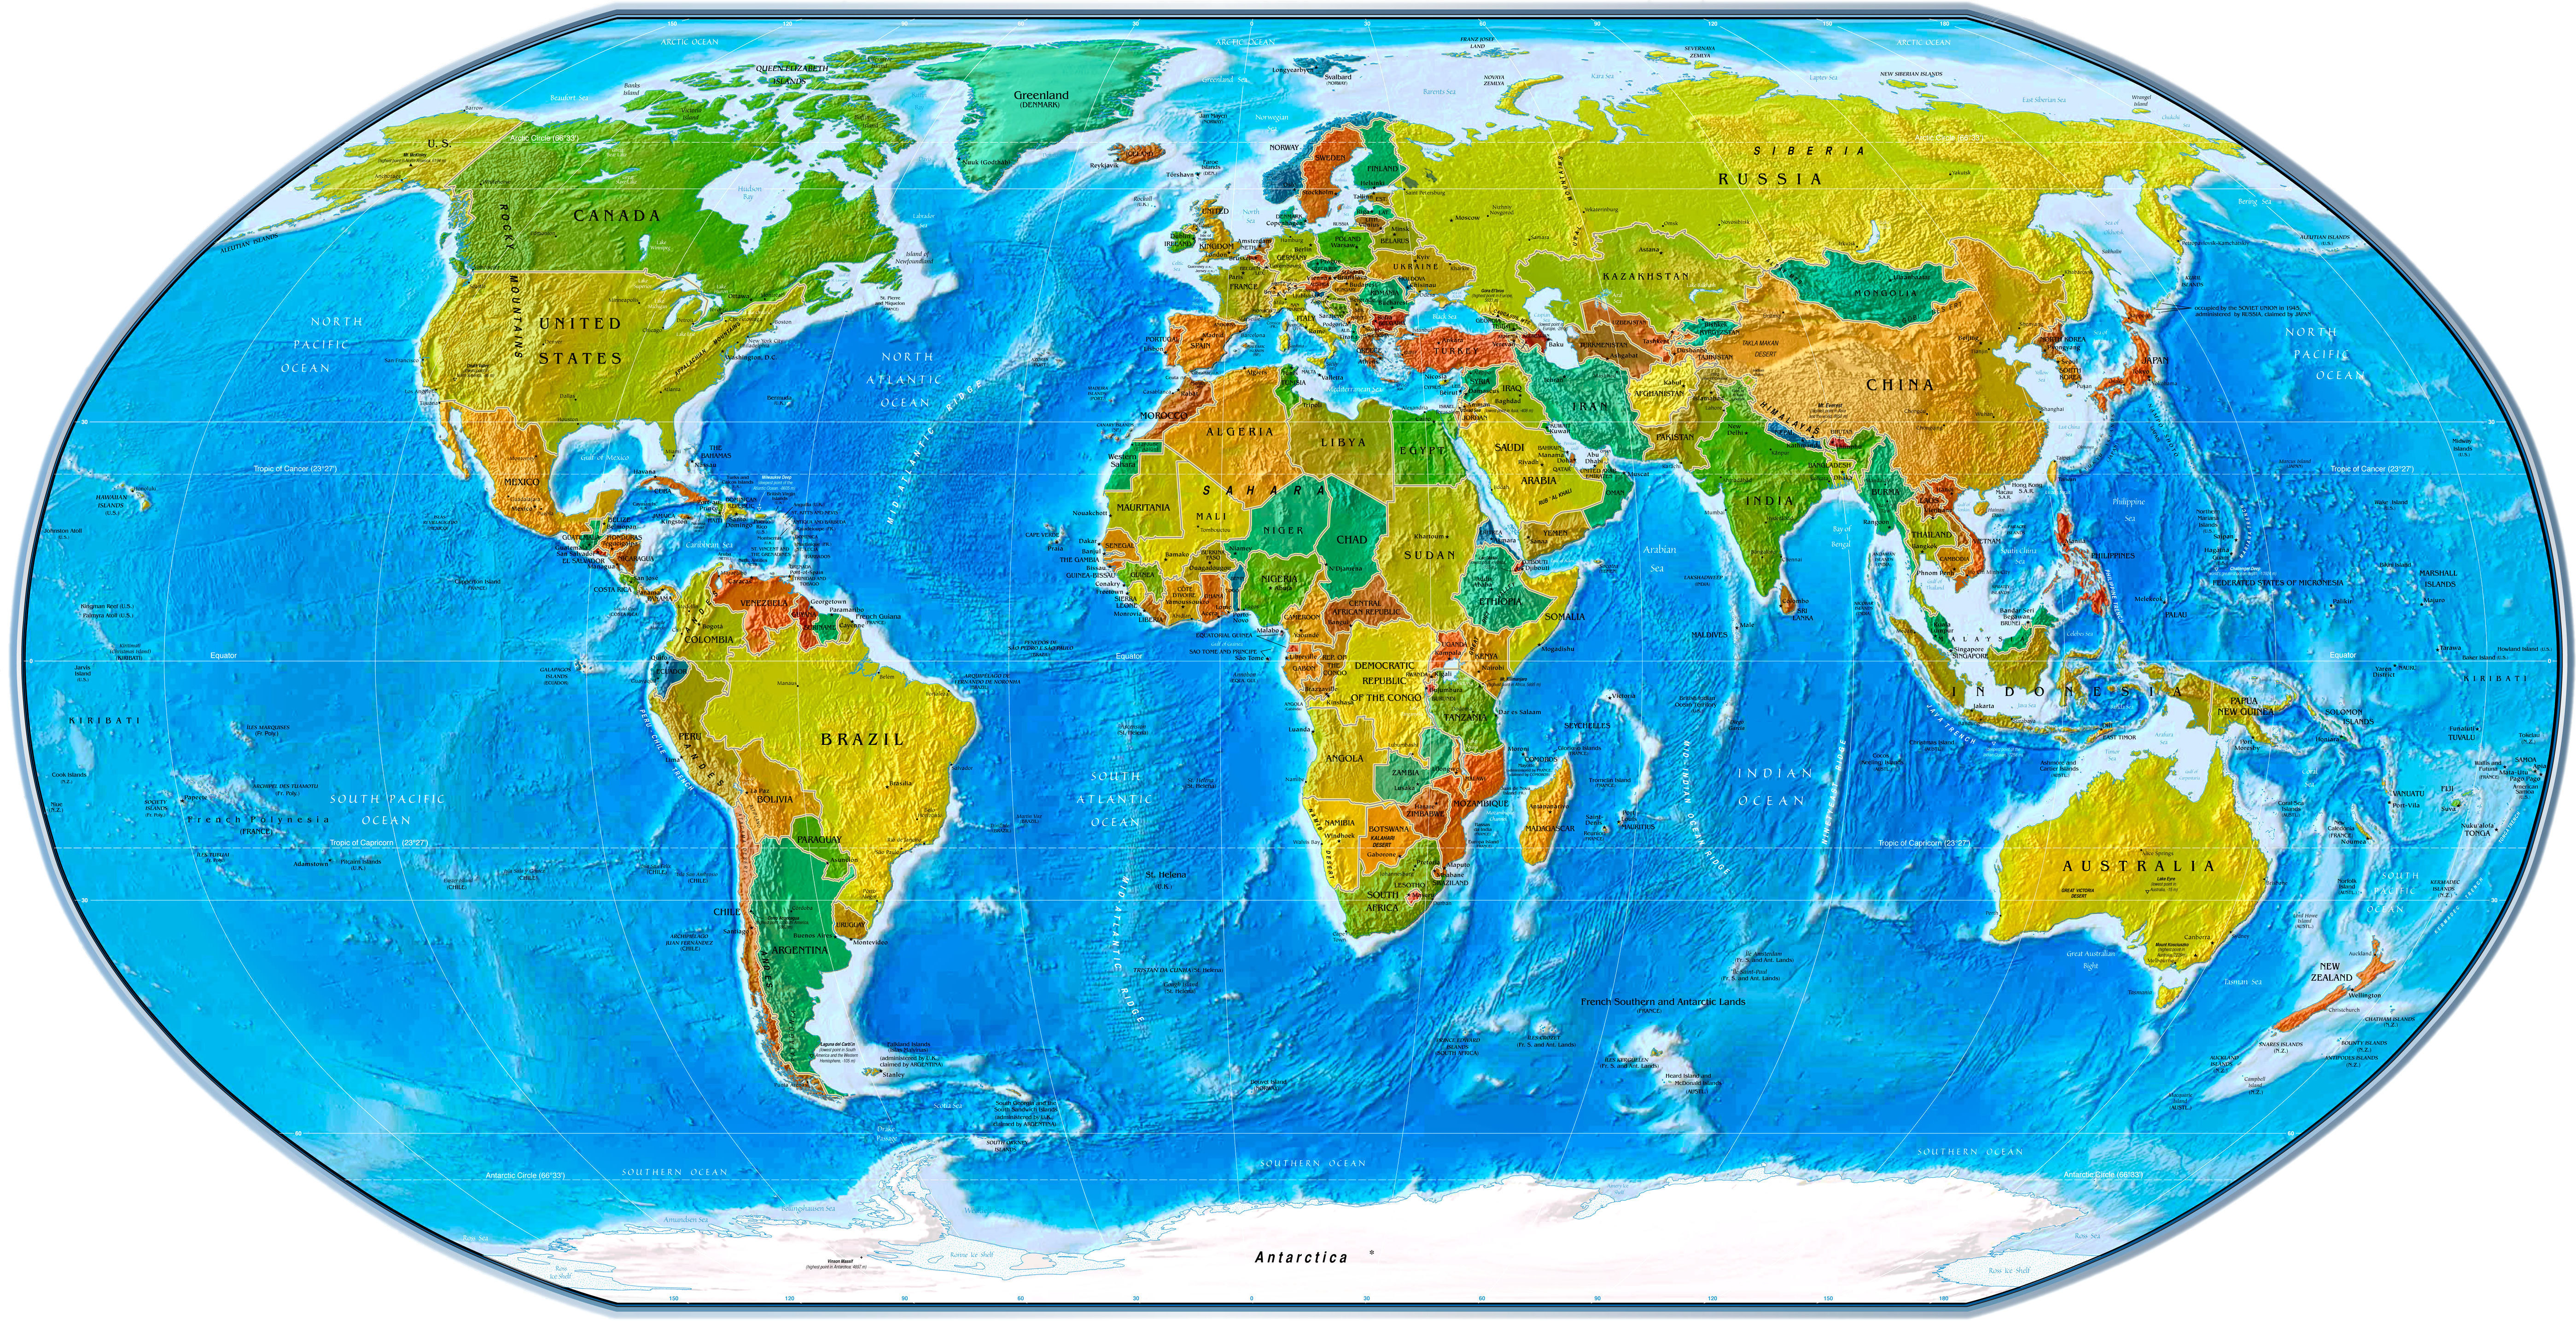 Free Download World Physical Map Wallpapers Pictures Hd Wallpapers 5594x2868 For Your Desktop Mobile Tablet Explore 49 World Wallpaper Hd World Map Desktop Wallpaper World Best Hd Wallpapers World Best Wallpaper